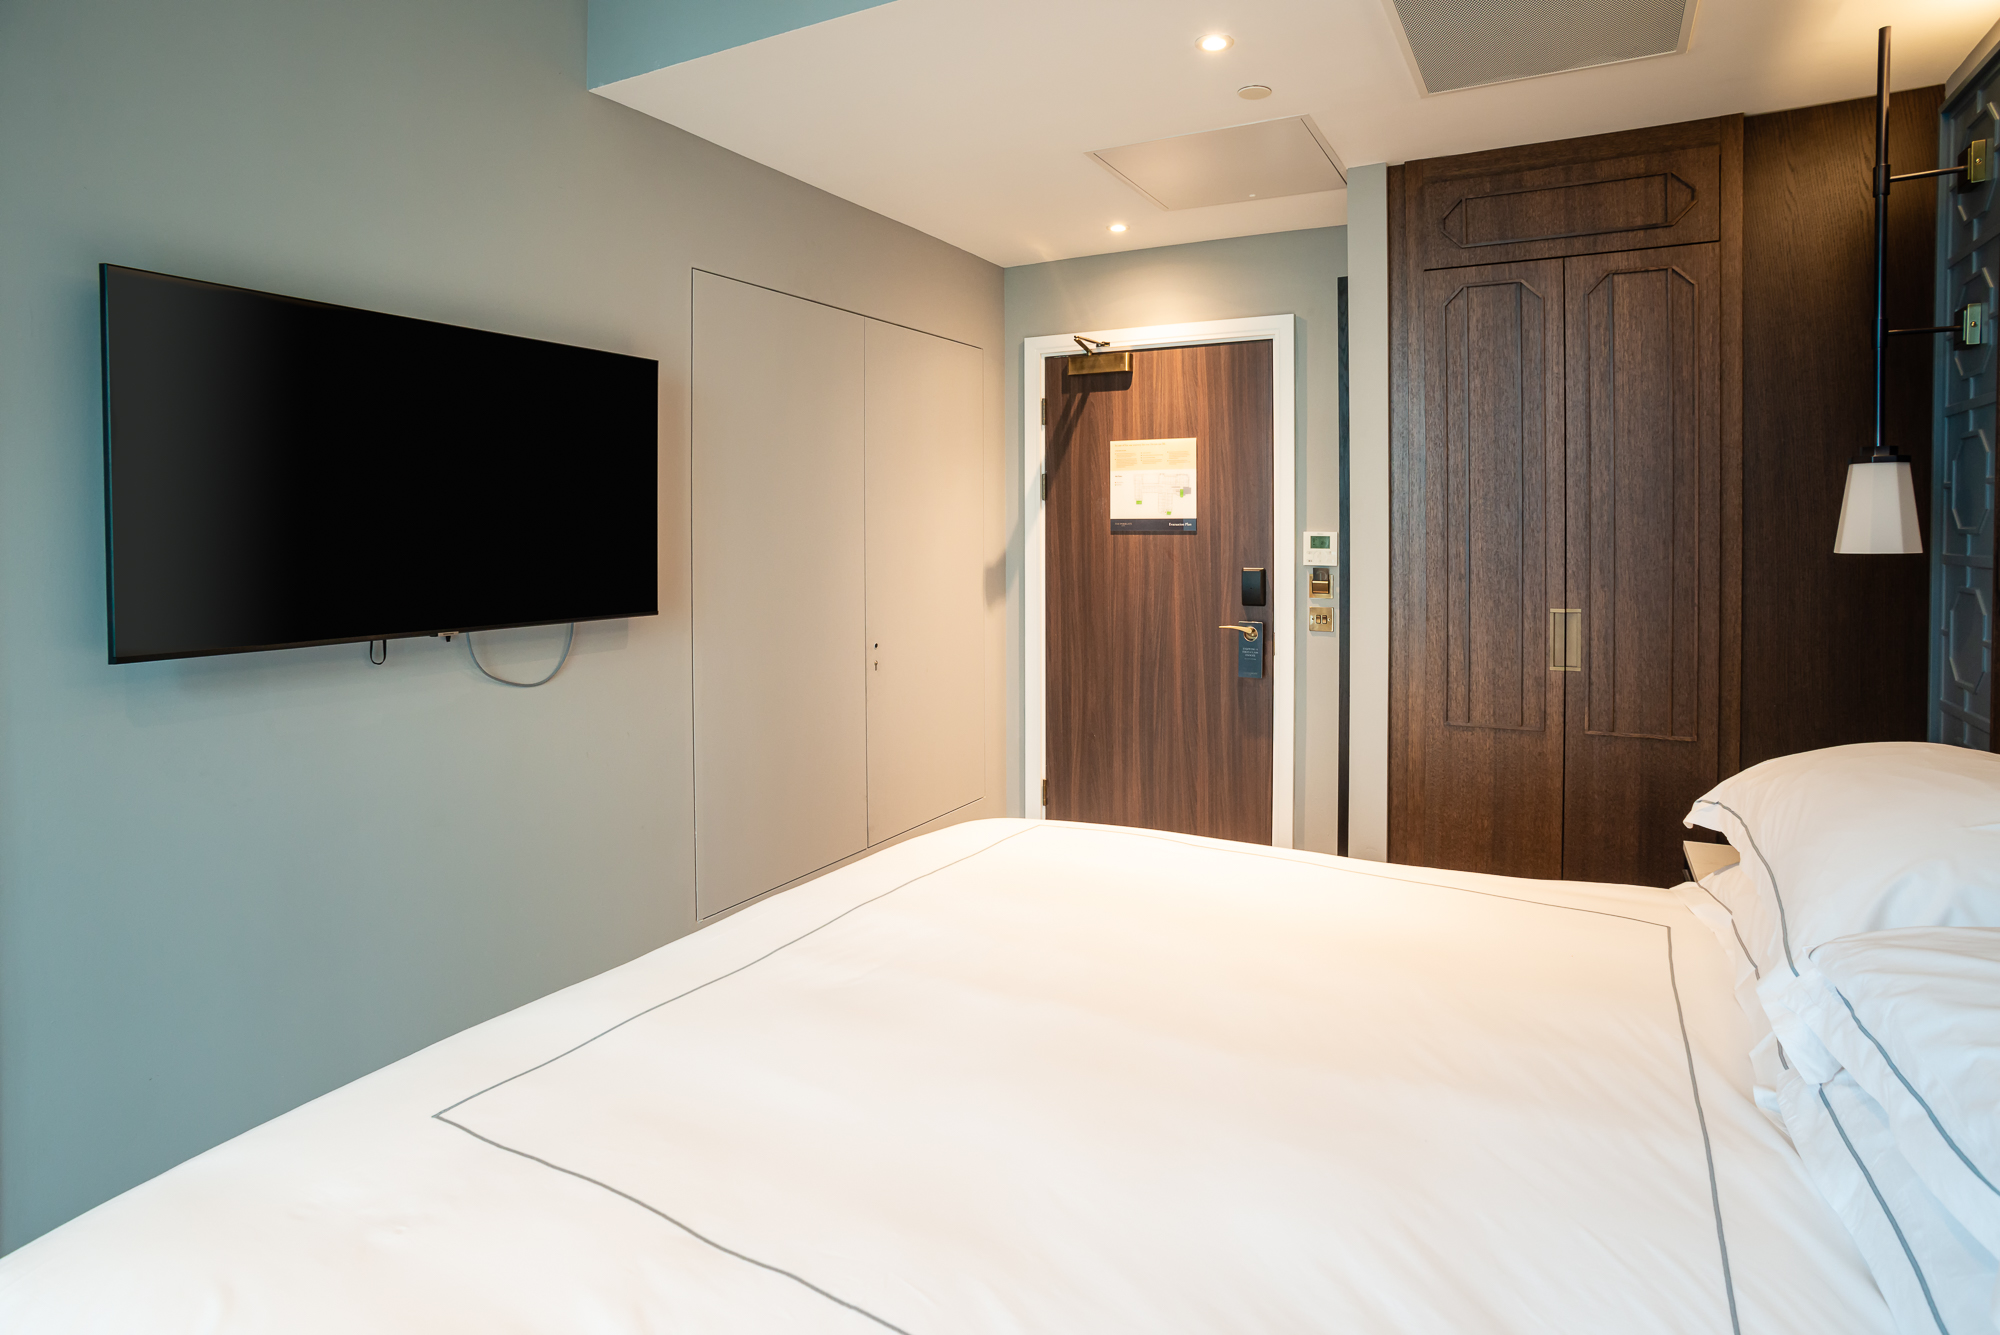 Profab Access adds a five star finish to Cardiff’s newest luxury hotel